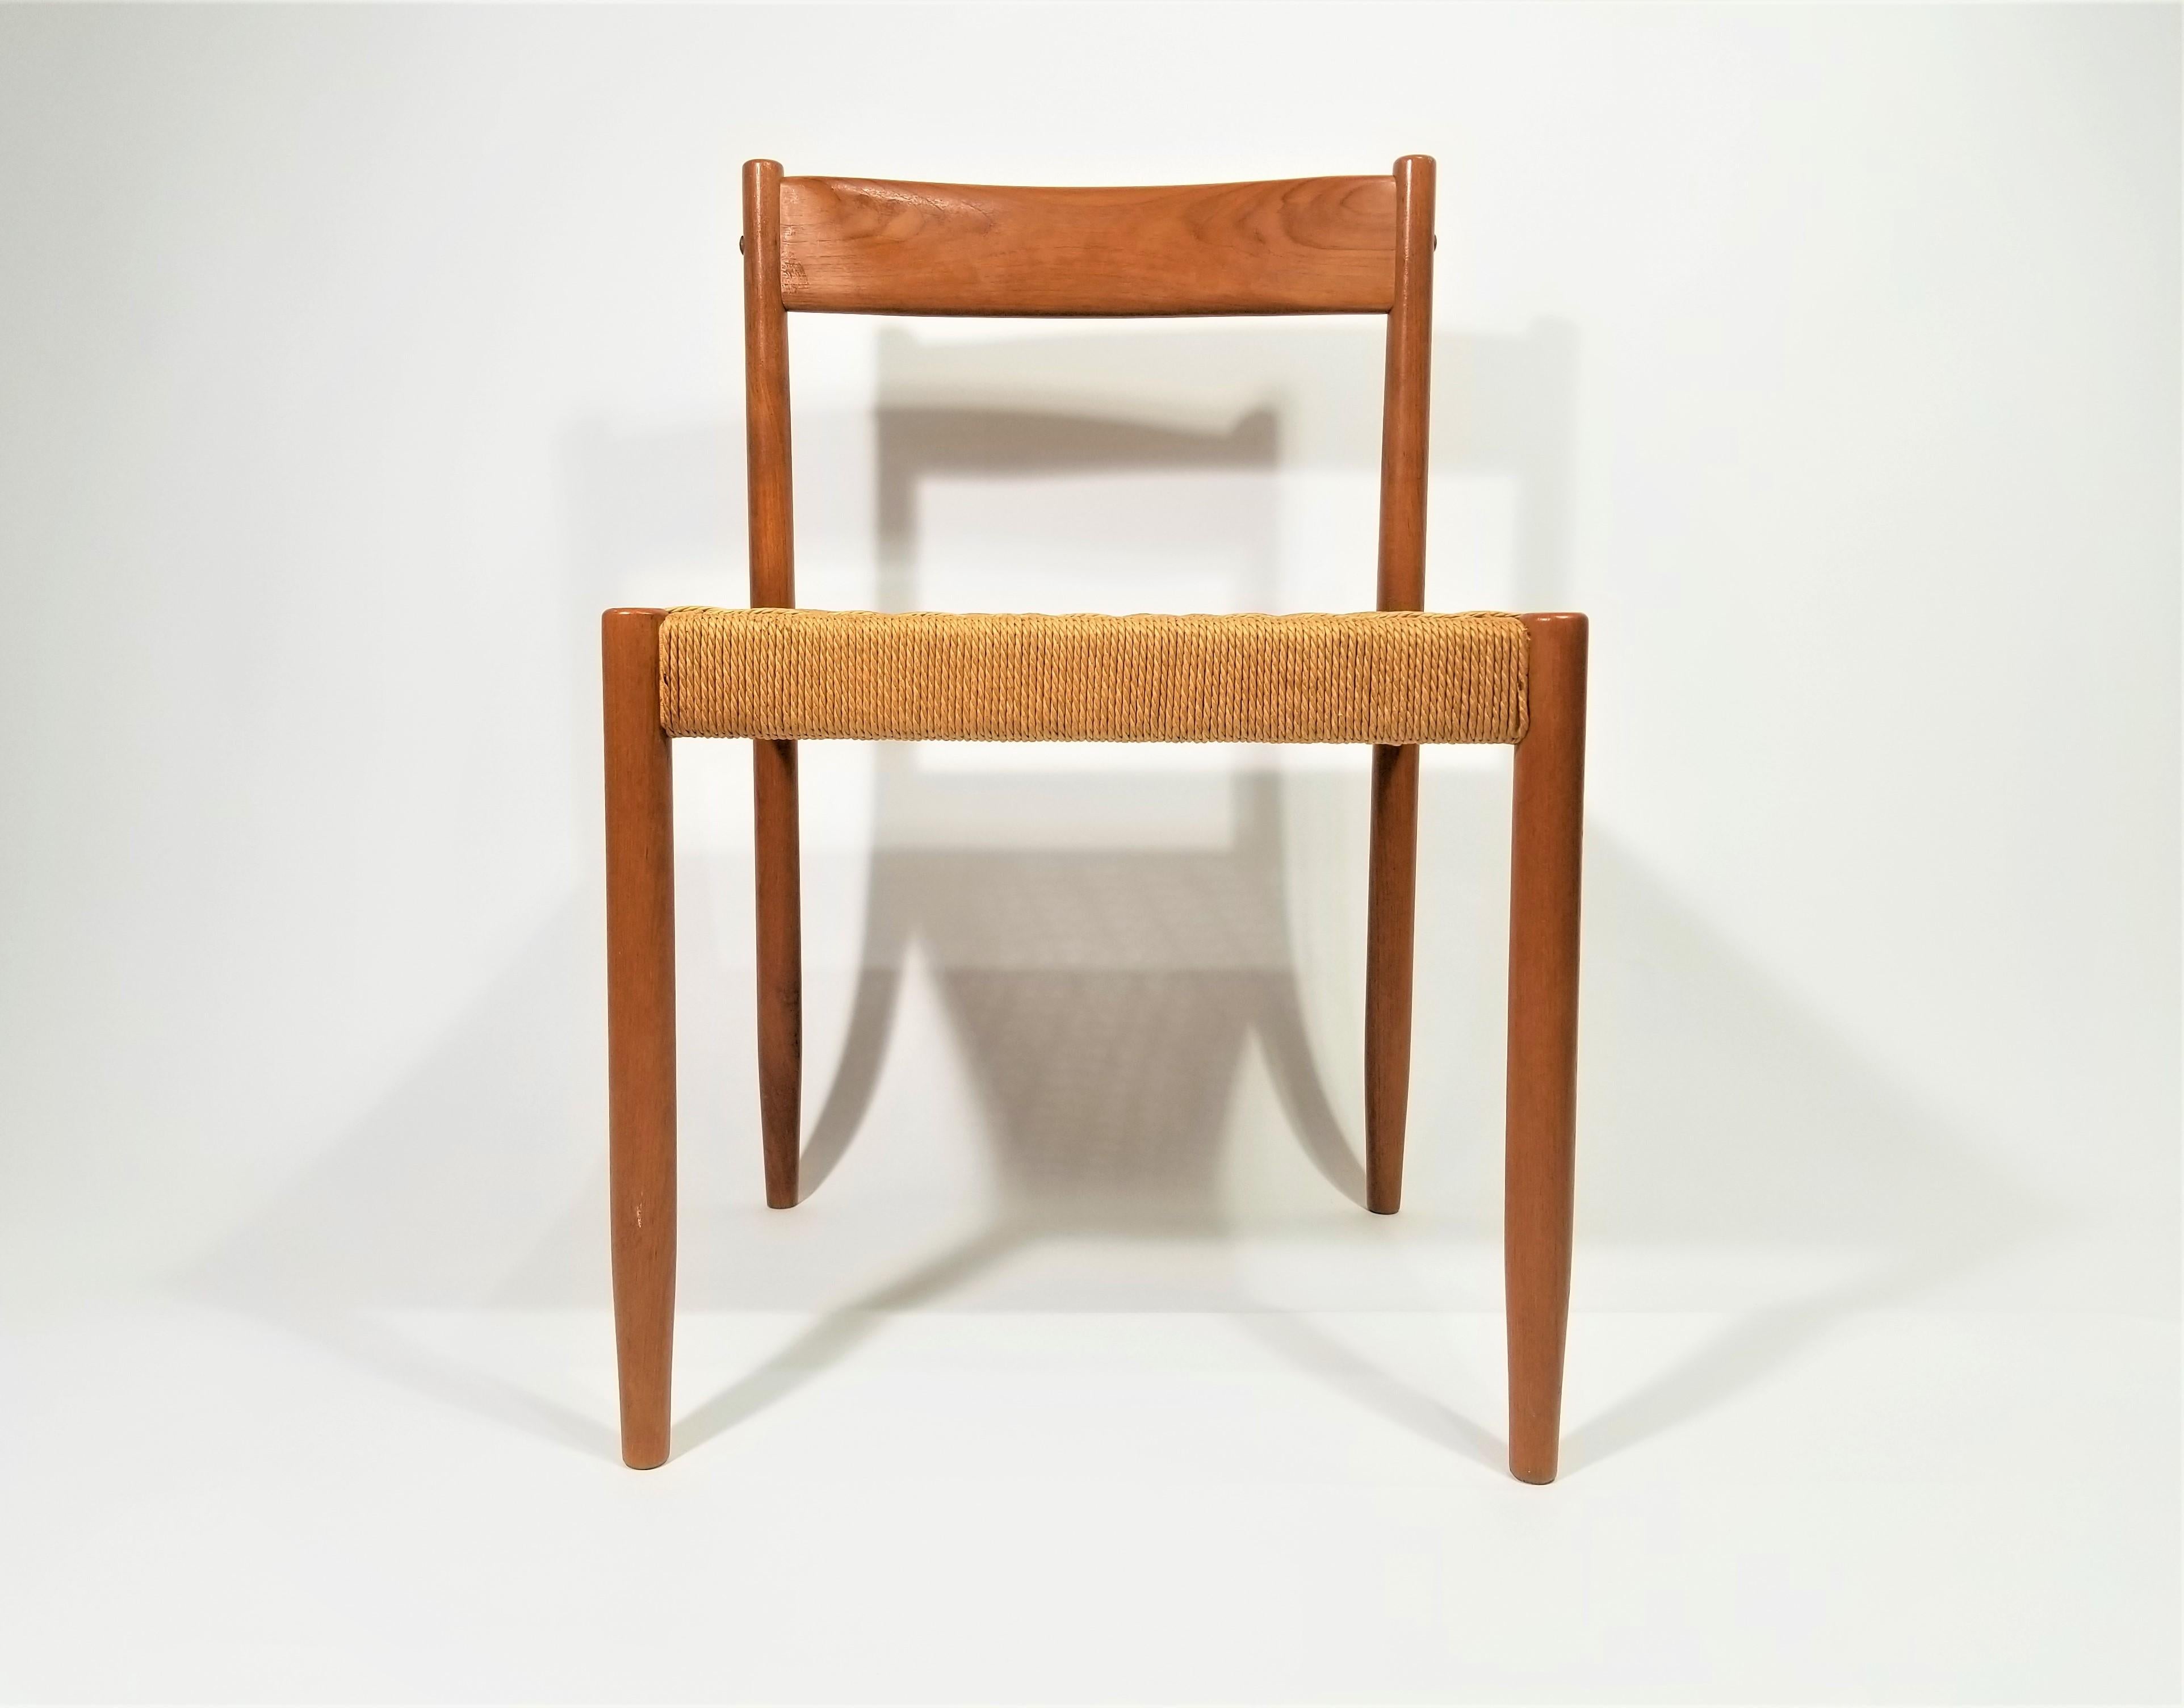 1960s Midcentury Poul Volther for Frem Rojle Danish Scandinavian teak side chair with handwoven seat. Excellent condition.
Local In house delivery can be arranged for this item in nyc and surrounding areas. 